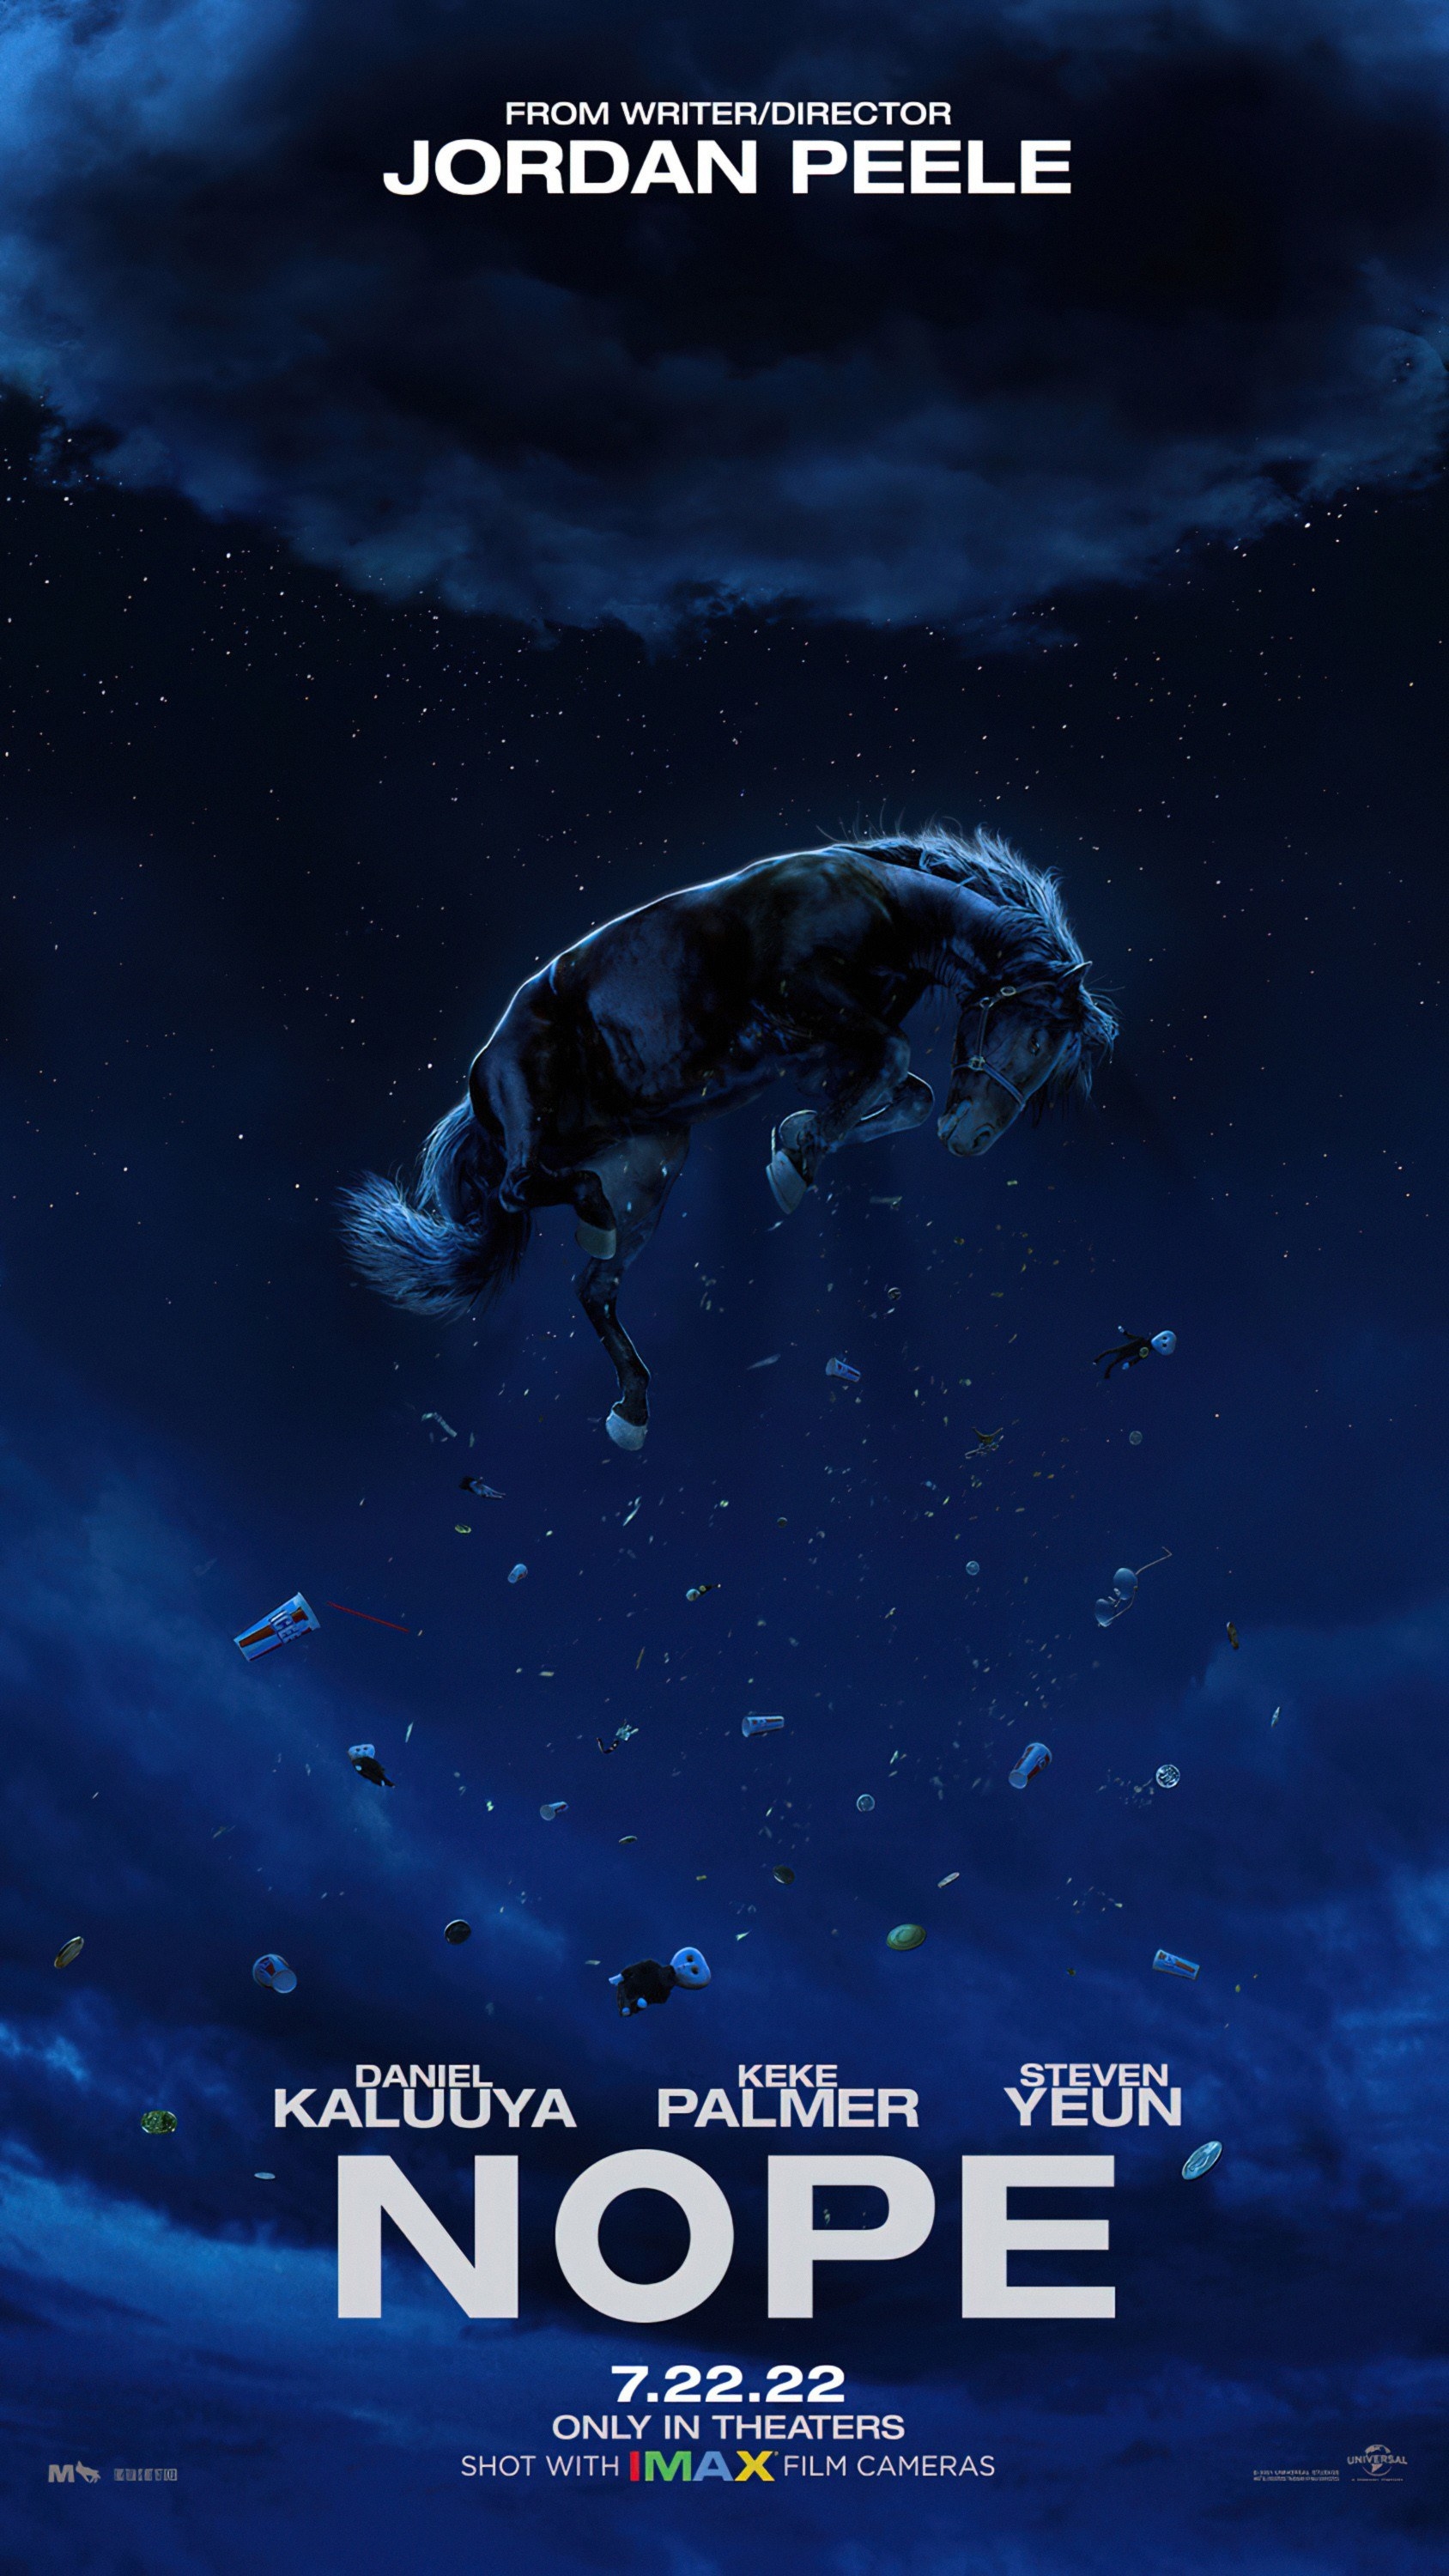 A Nope poster featuring a horse in the night sky along with a plethora of objects